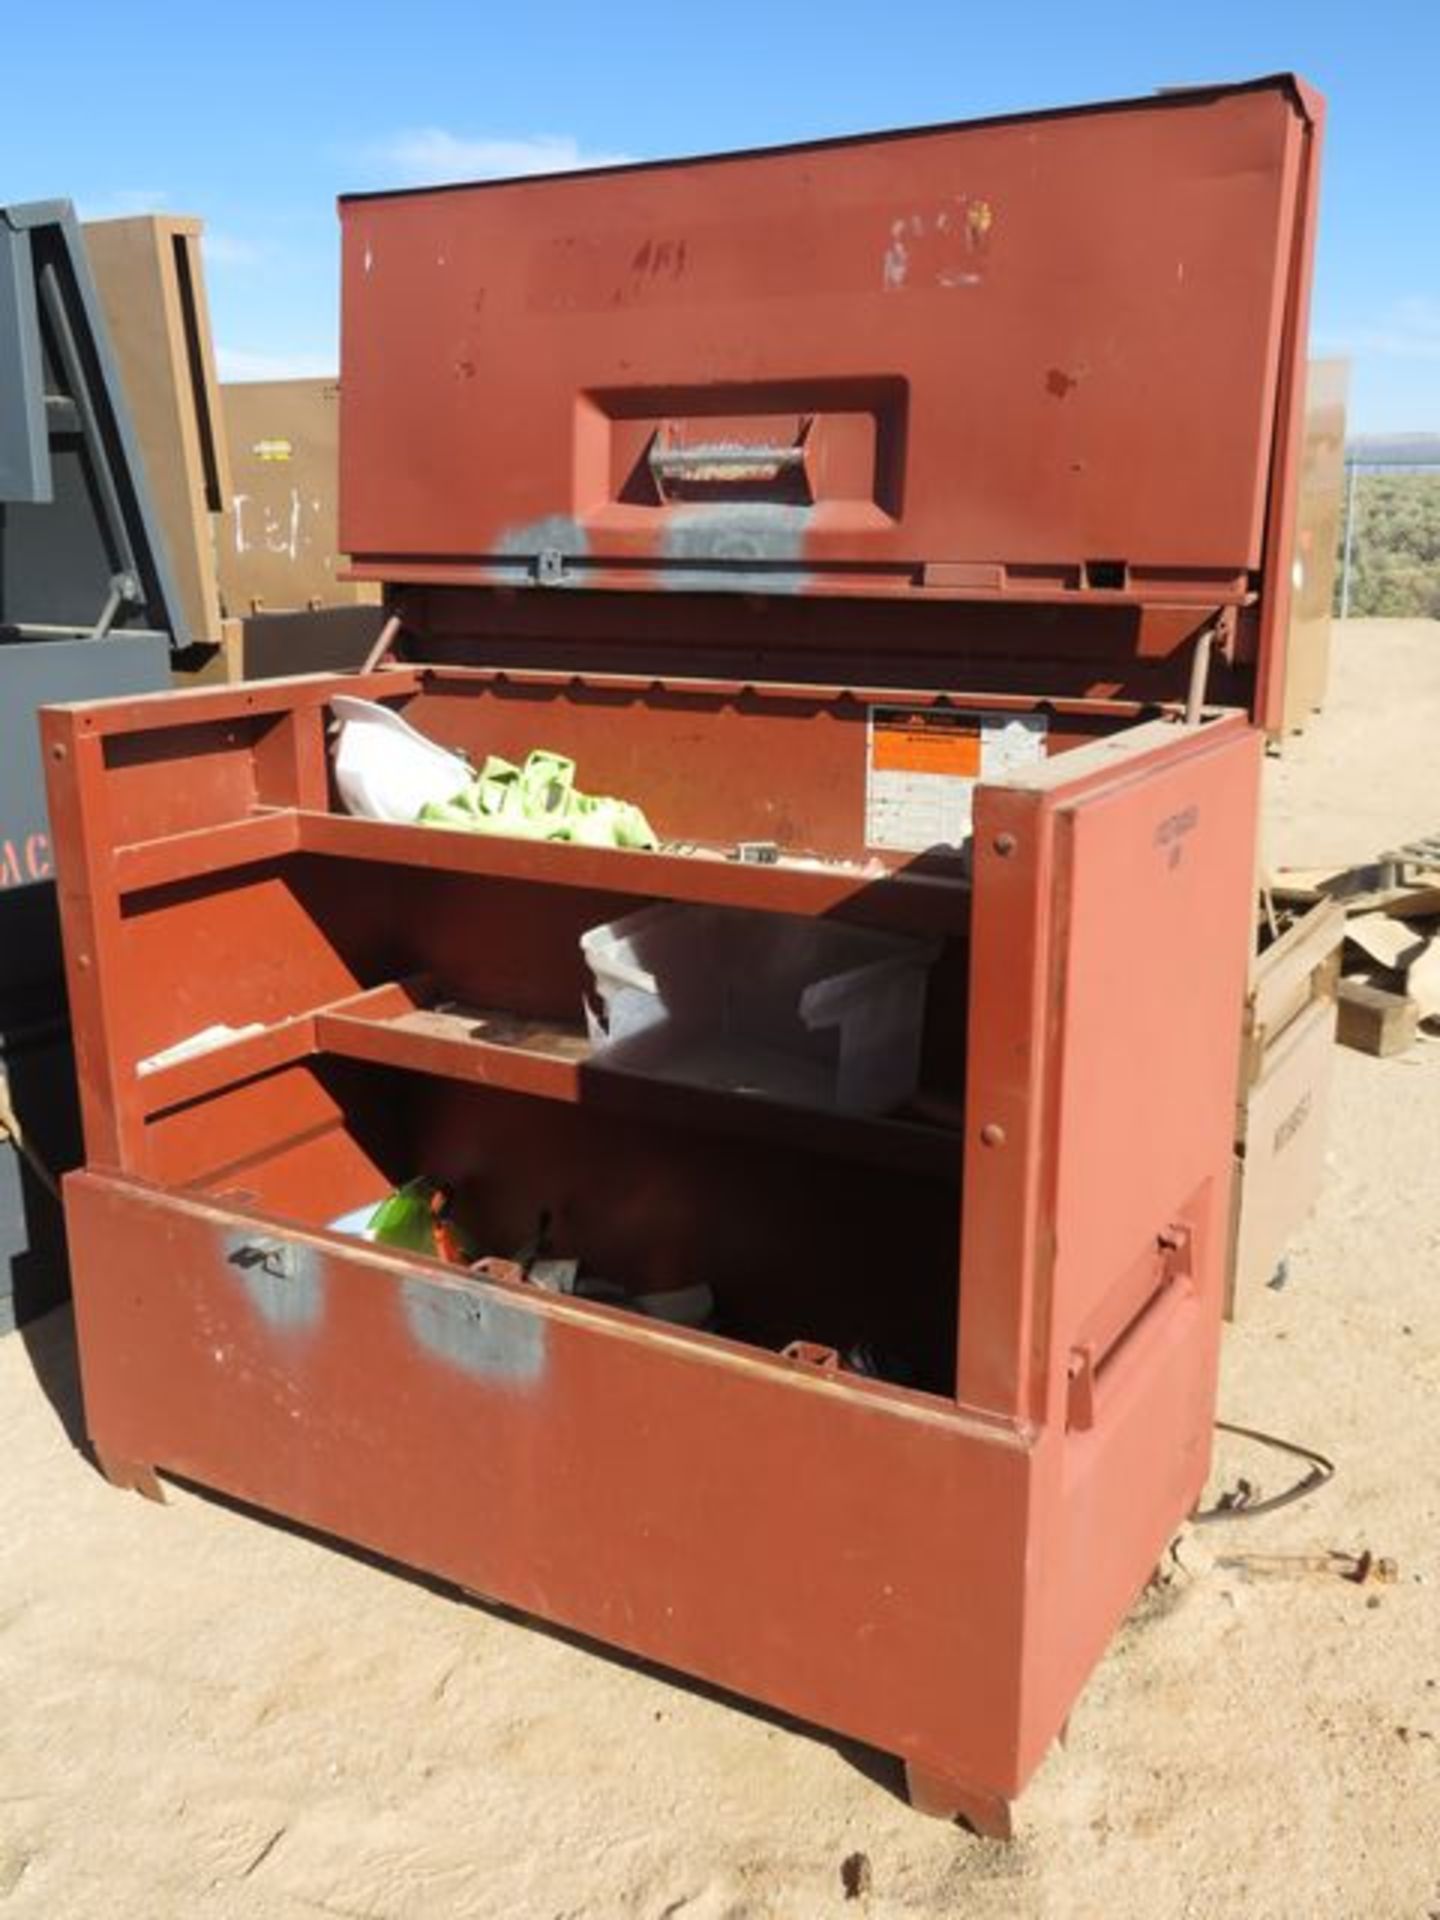 Jobox Tool Chest. 60" x 31" x 50"H. Asset Located at 42134 Harper Lake Road, Hinkley, CA 92347. - Image 2 of 3